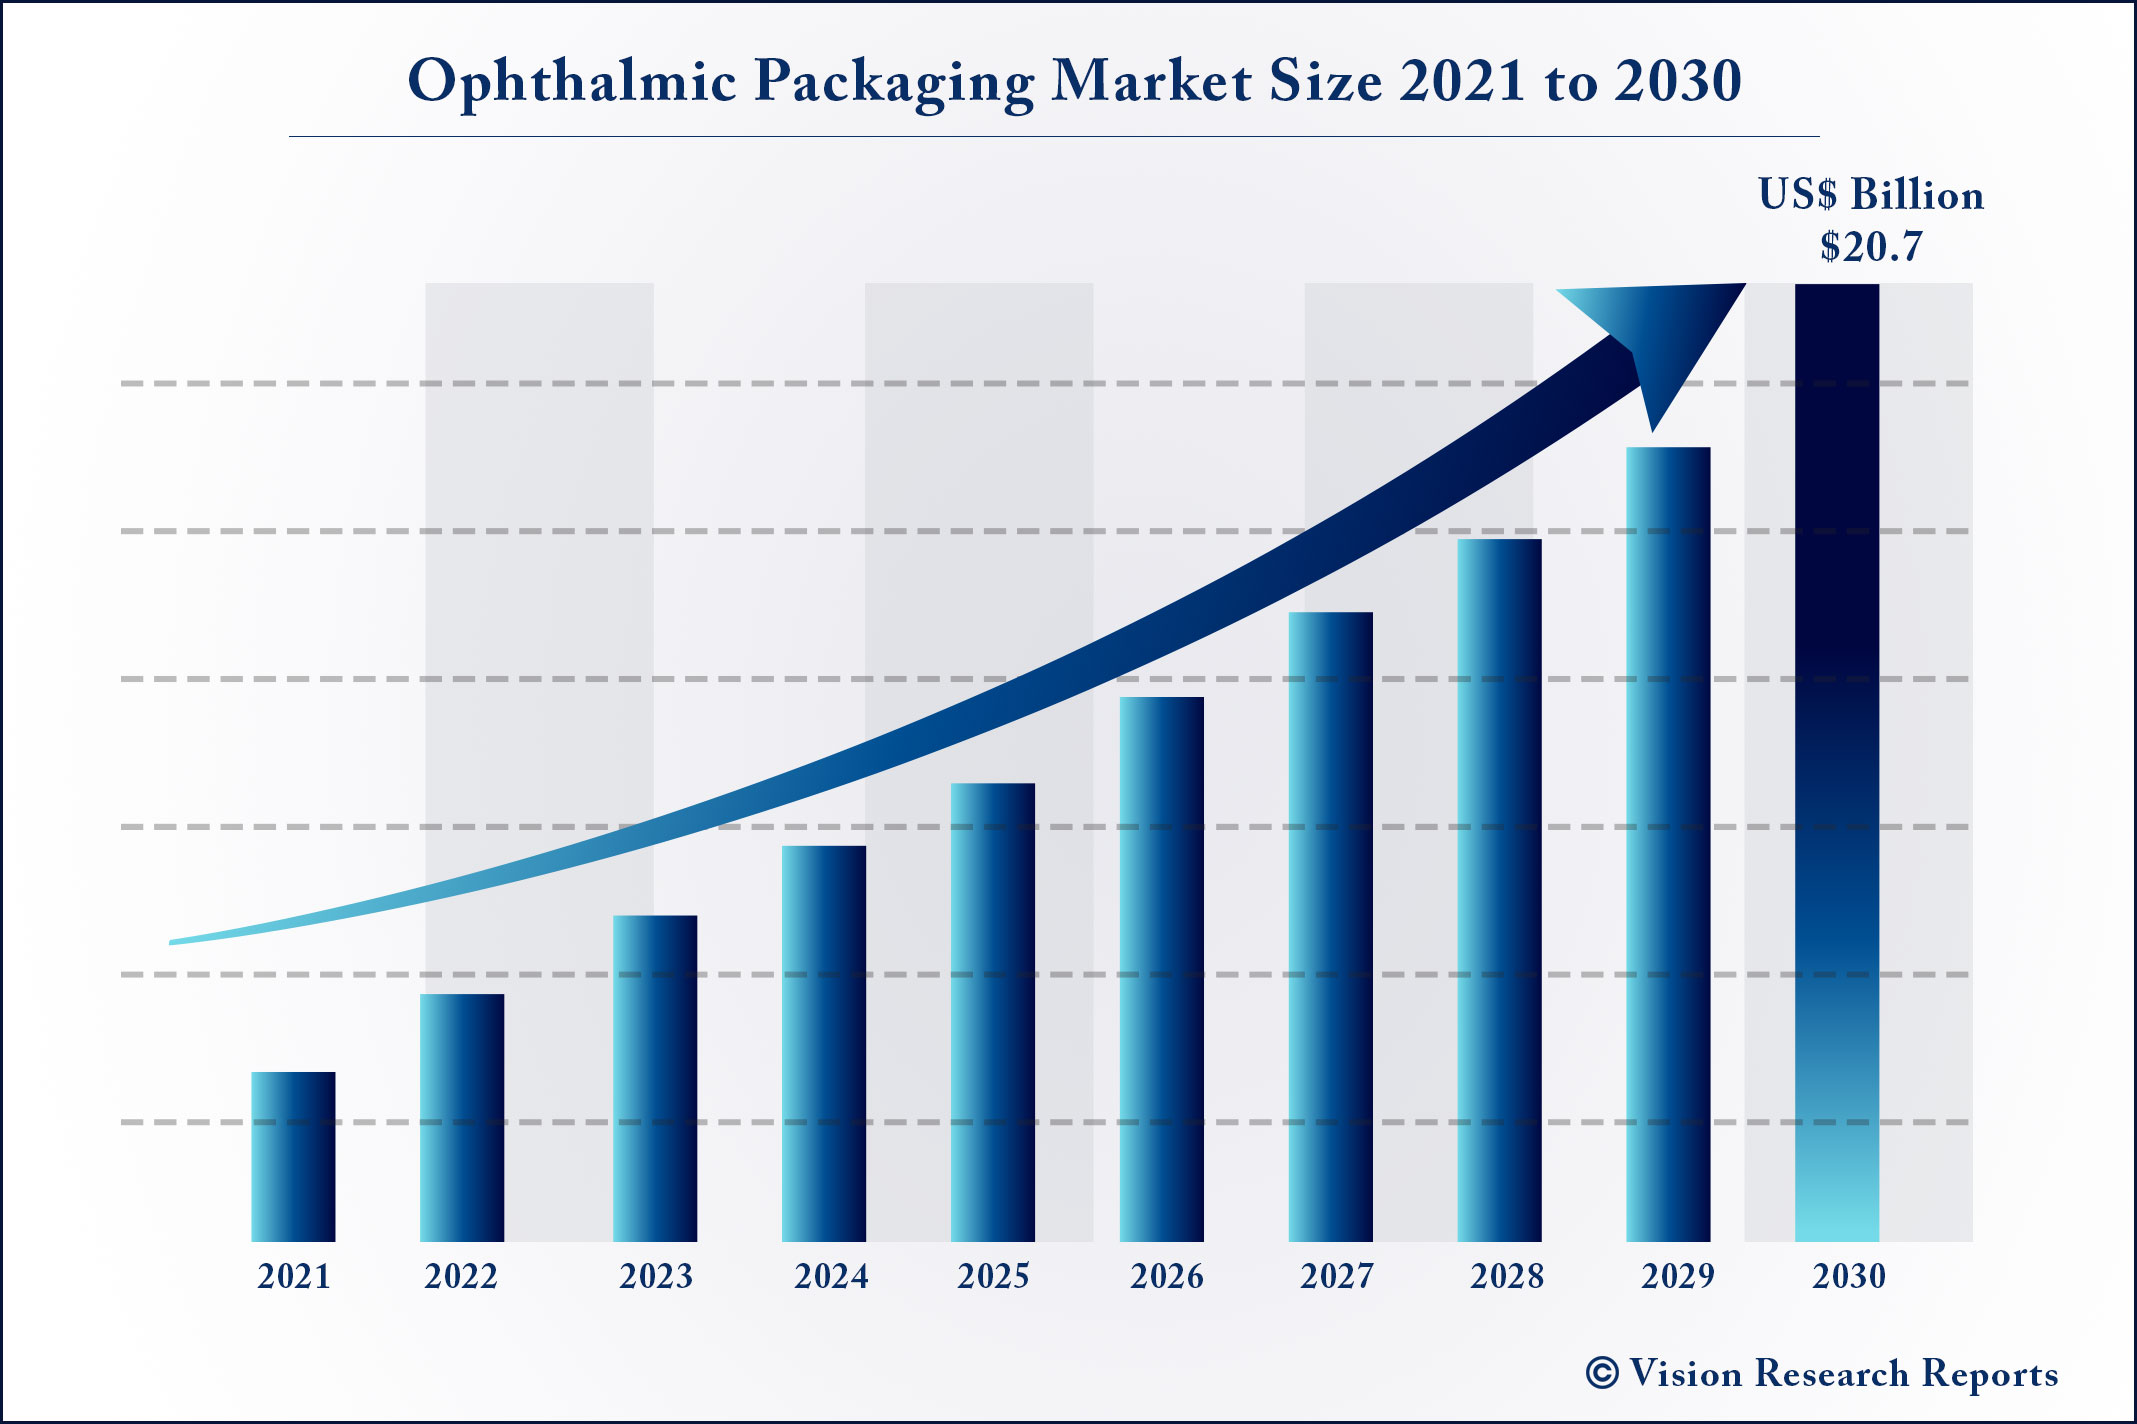 Ophthalmic Packaging Market Size 2021 to 2030